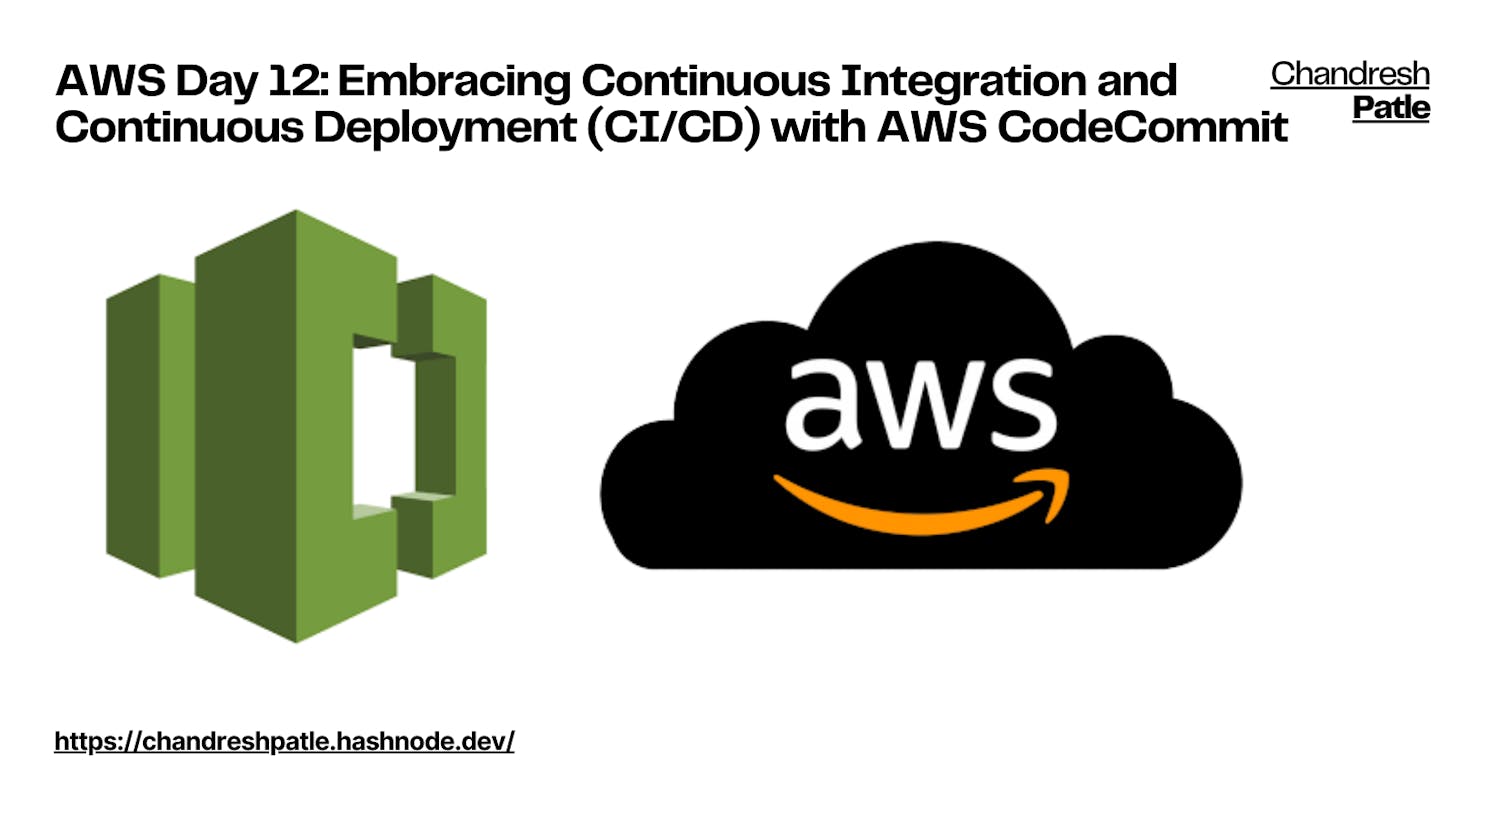 AWS Day 12: Embracing Continuous Integration and Continuous Deployment (CI/CD) with AWS CodeCommit